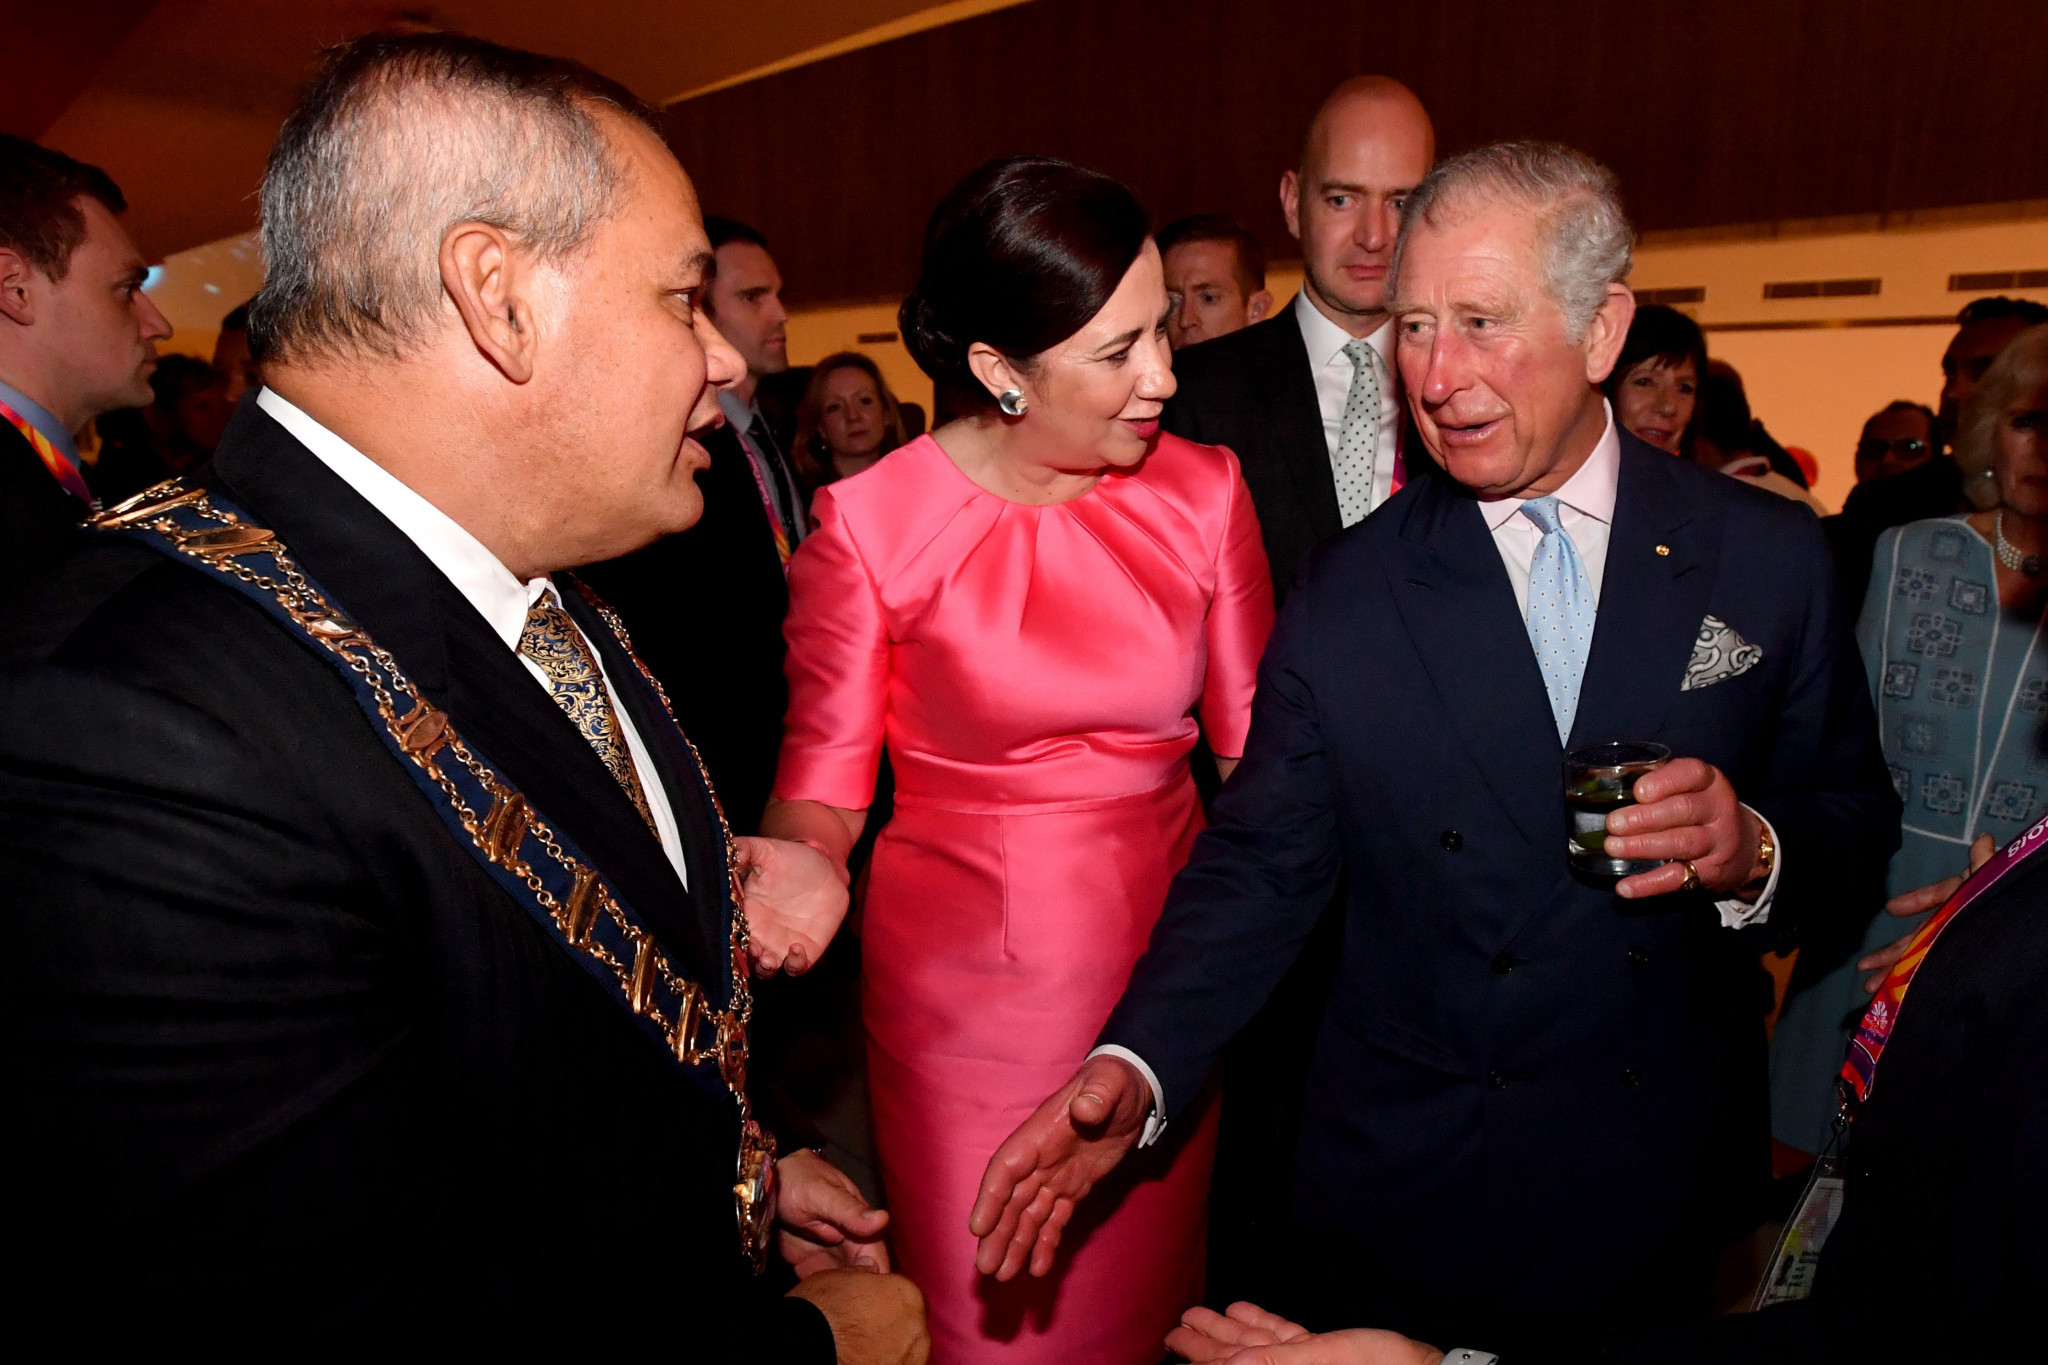 Queensland Premier Annastacia Palaszczuk, centre, has told Gold Coast Mayor Tom Tate, left, there is insufficient time to prepare for the Commonwealth Games in 2026 ©Getty Images 